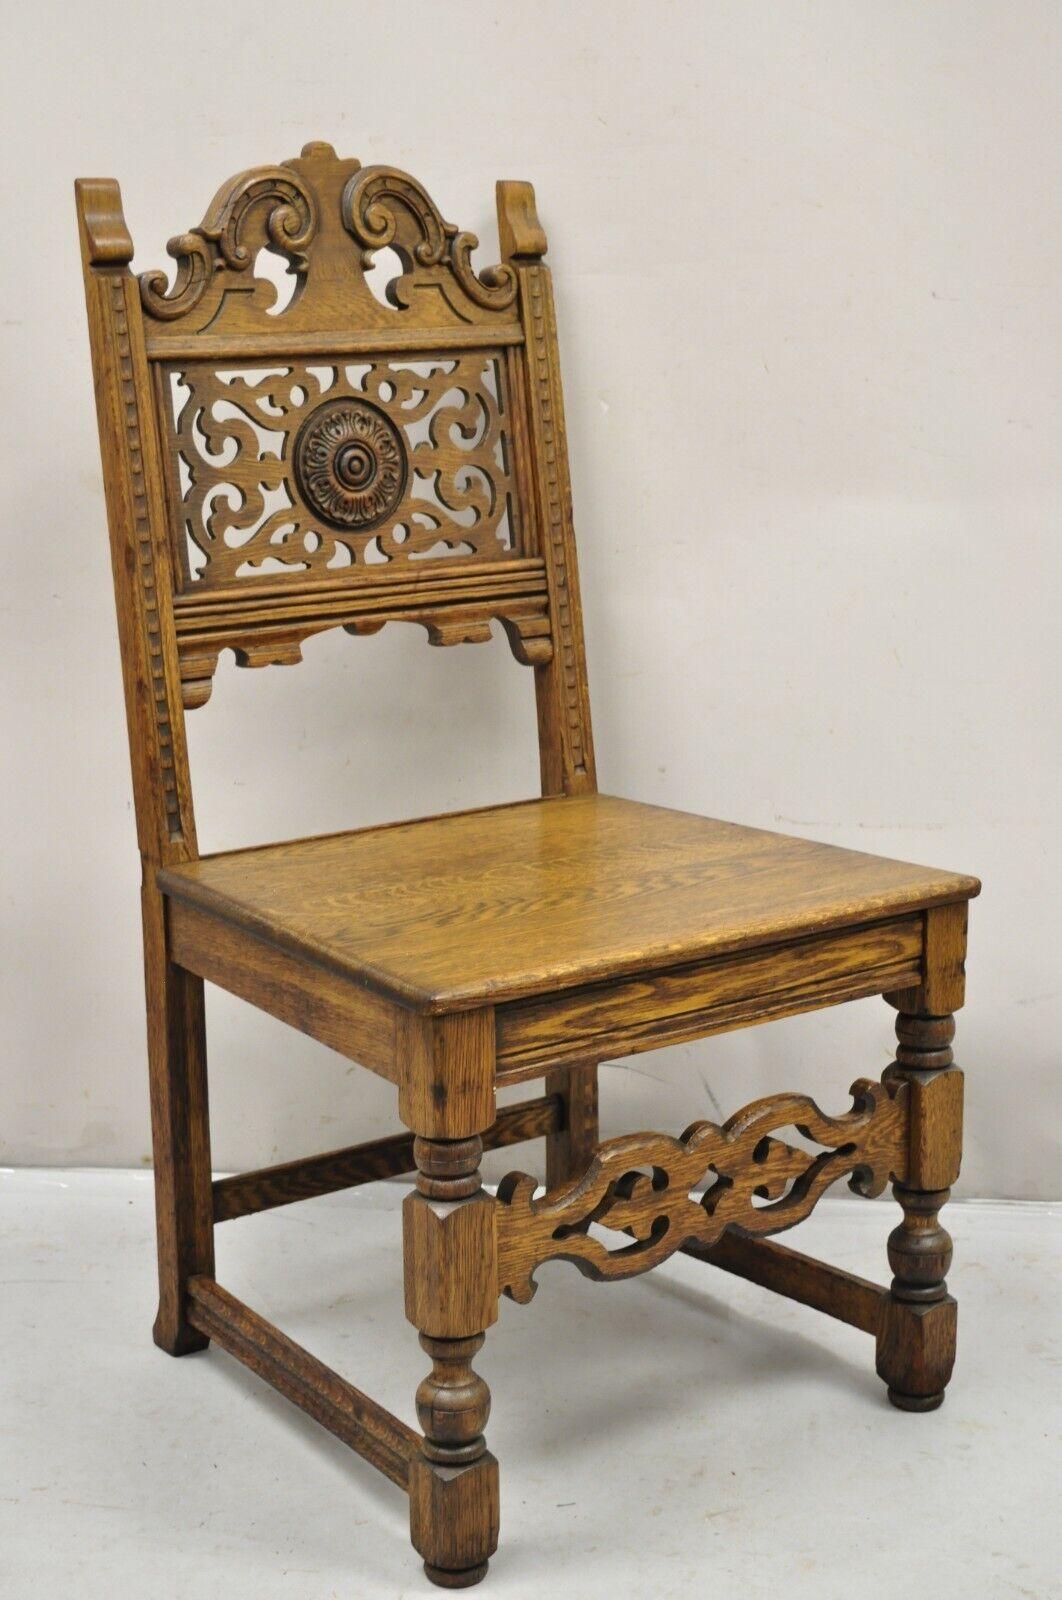 Antique Vanleigh Furniture New York Carved Oak Italian Renaissance Style Throne Dining Side Chair. Item features the original label, solid oak wood construction, beautiful wood grain, very nice antique item. Circa Early 1900s. Measurements: 41.5